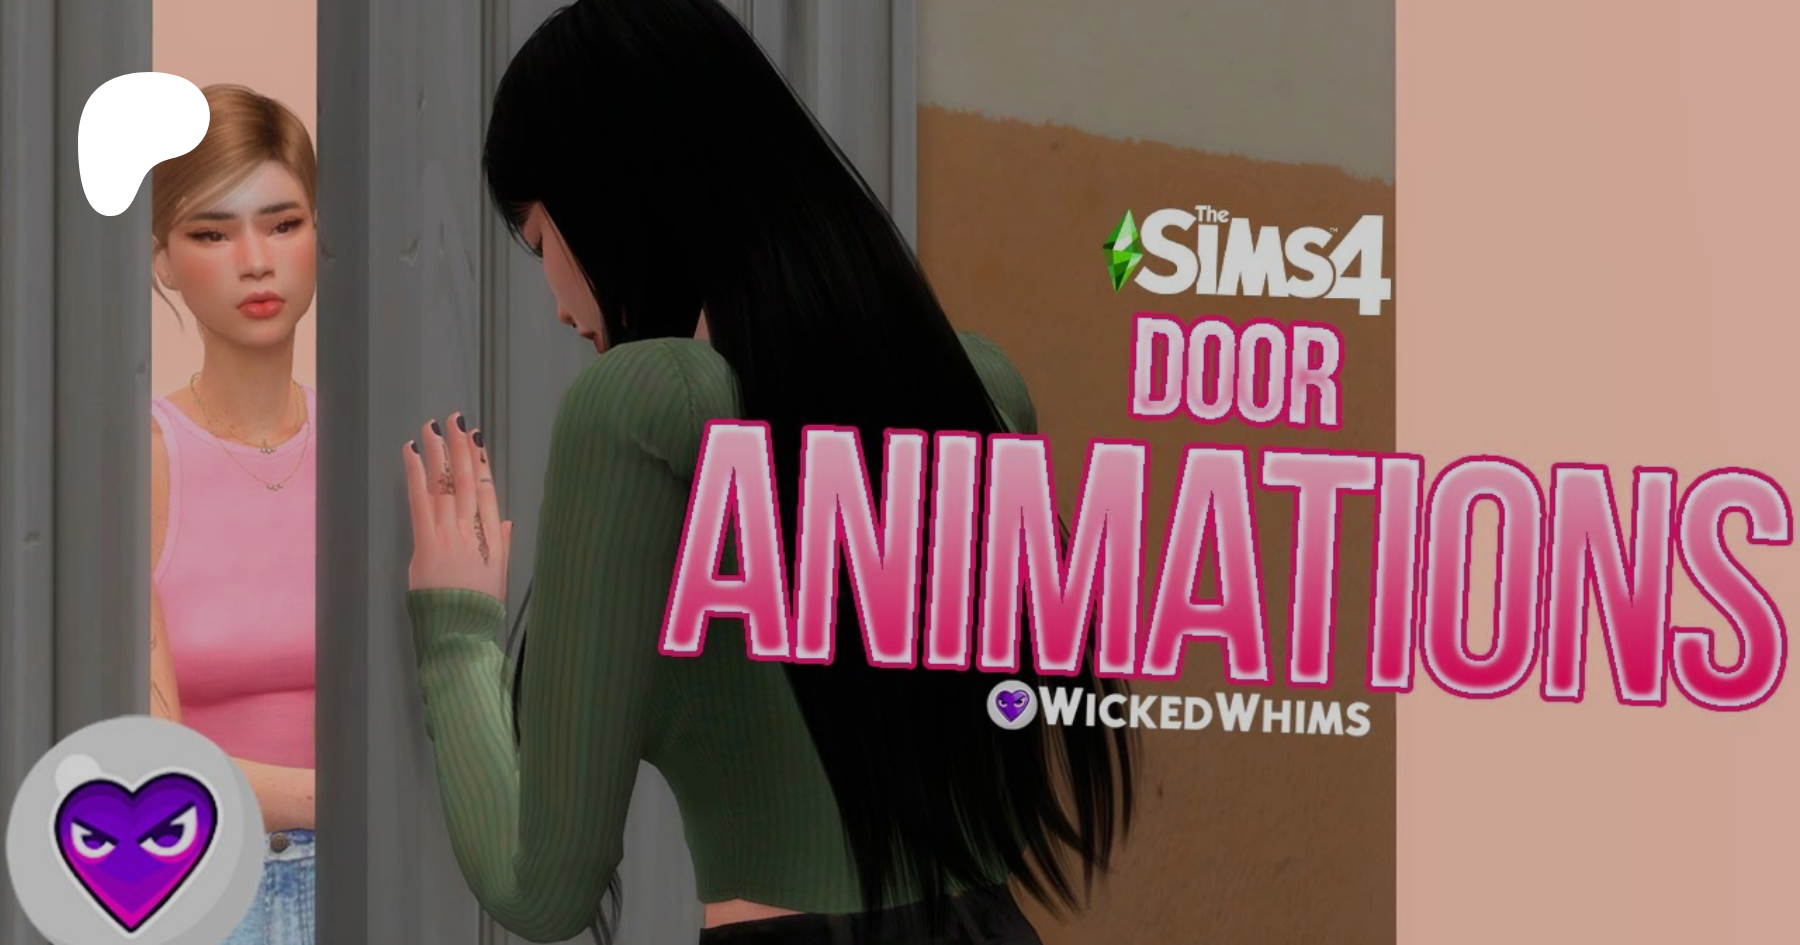 Wicked whims SIMS 4 animations. Wicked Wims animations. Wicked whims all animations. He SIMS 4 "wickedwhims, анимации. Wicked whims sims 4 как установить